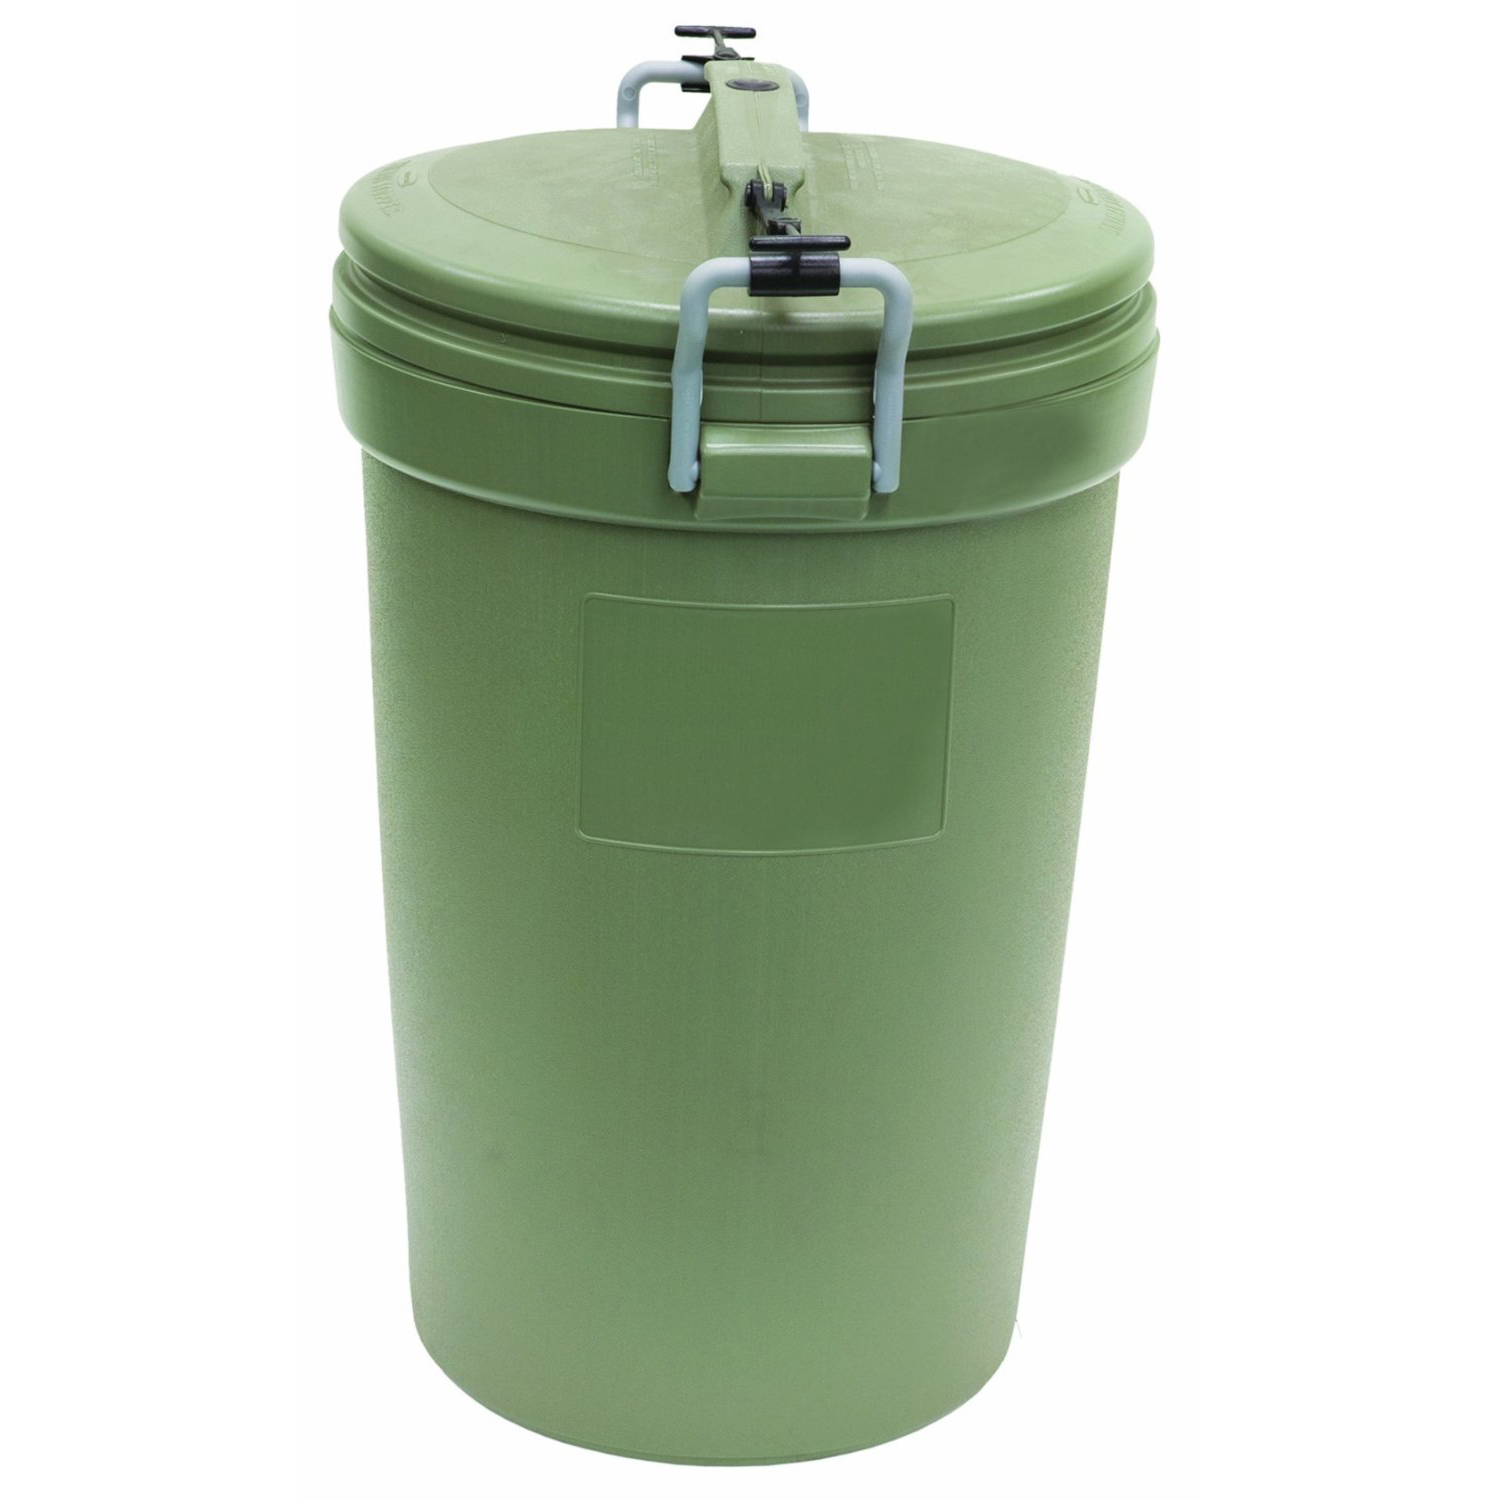 Rubbermaid 32-Gallon Animal Stopper Round Trash Can  $33.29